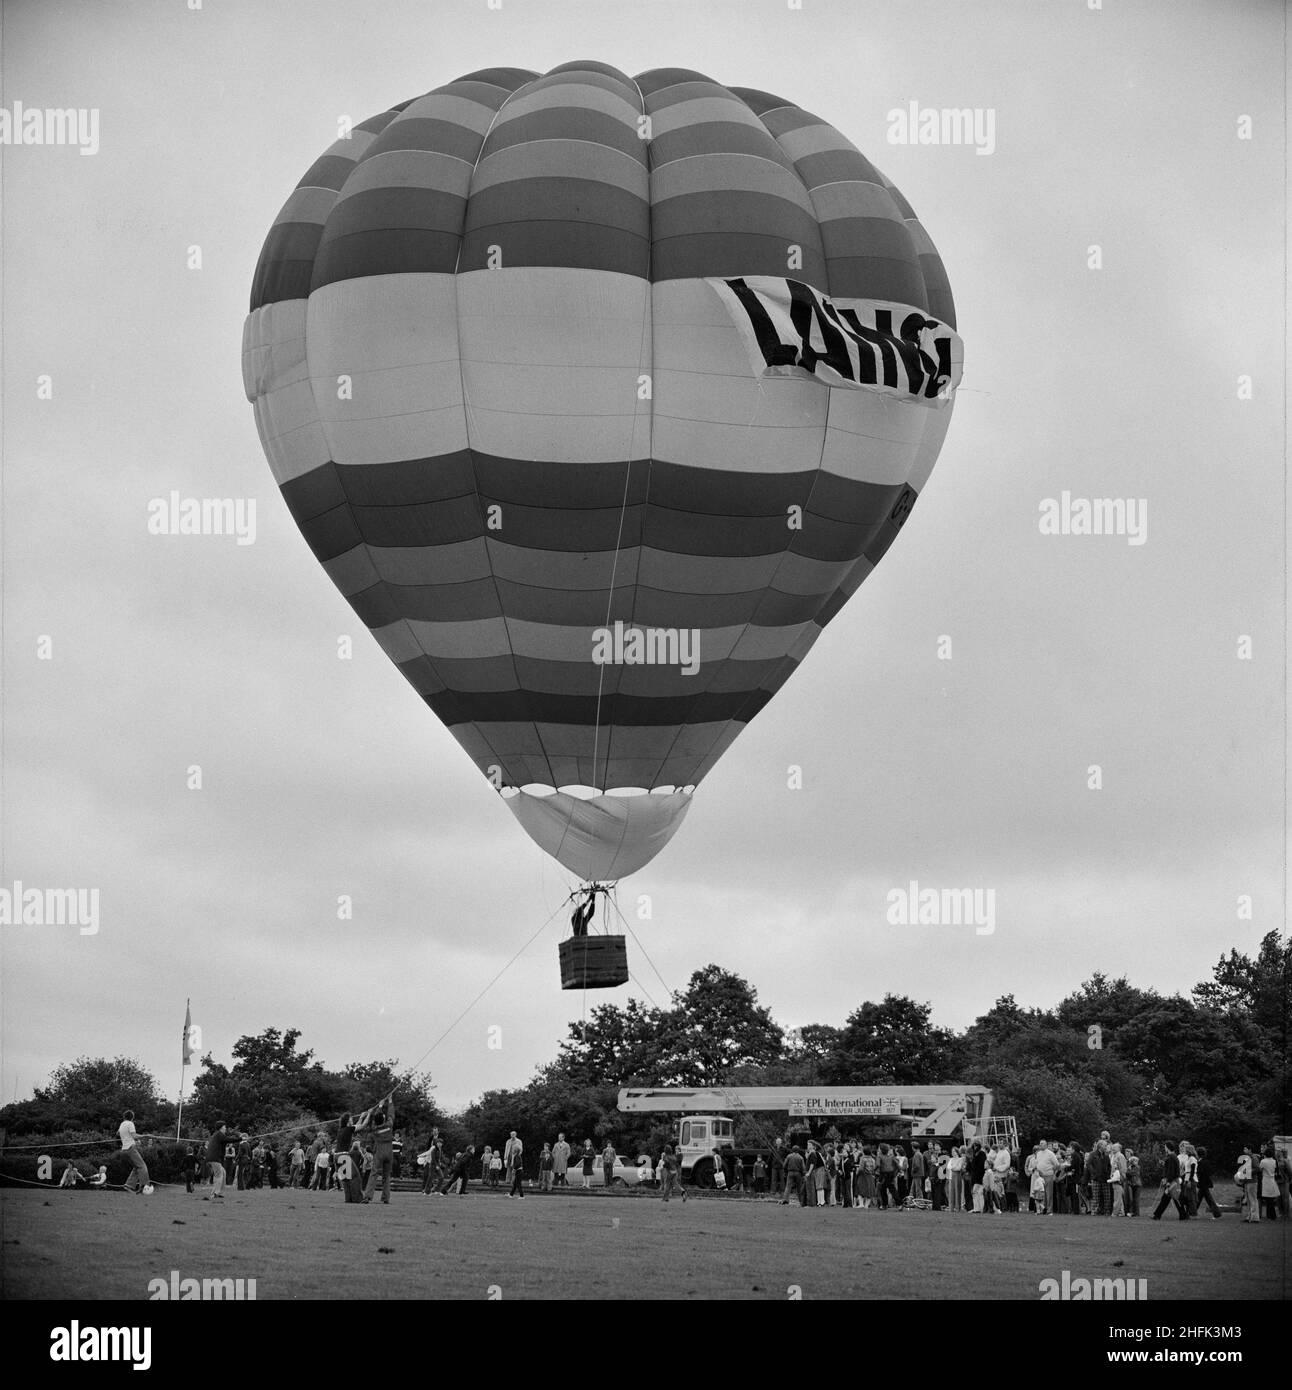 Laing Sports Ground, Rowley Lane, Elstree, Barnet, London, 18/06/1977. A hot air balloon emblazoned with a Laing banner taking off from the Elstree Sports Ground during the annual Laing Gala Day festivities. This photograph was used in the July 1977 issue of Team Spirit, the Laing company newsletter. Stock Photo